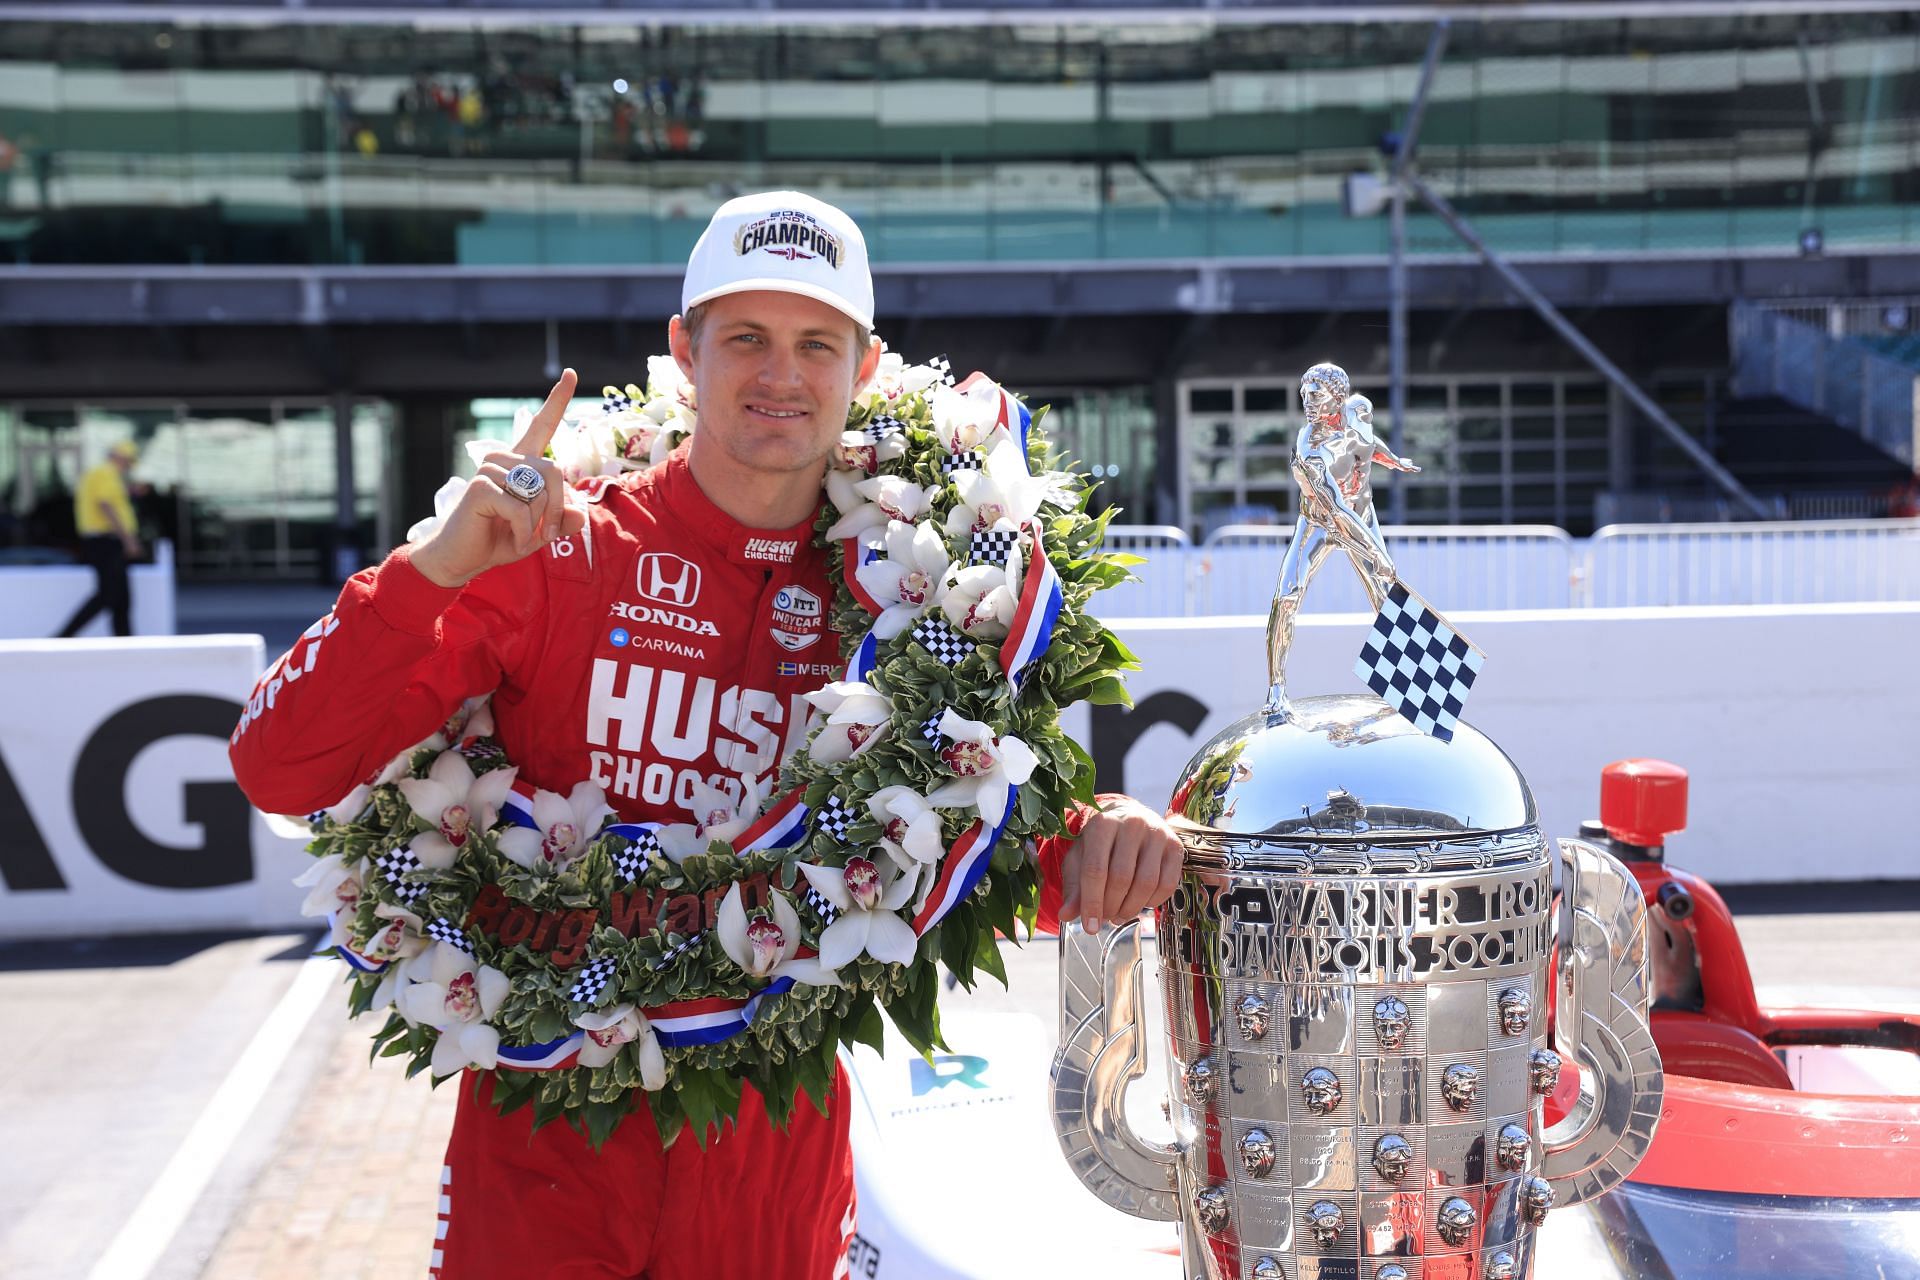 106th Running Of The Indianapolis 500 - Champion